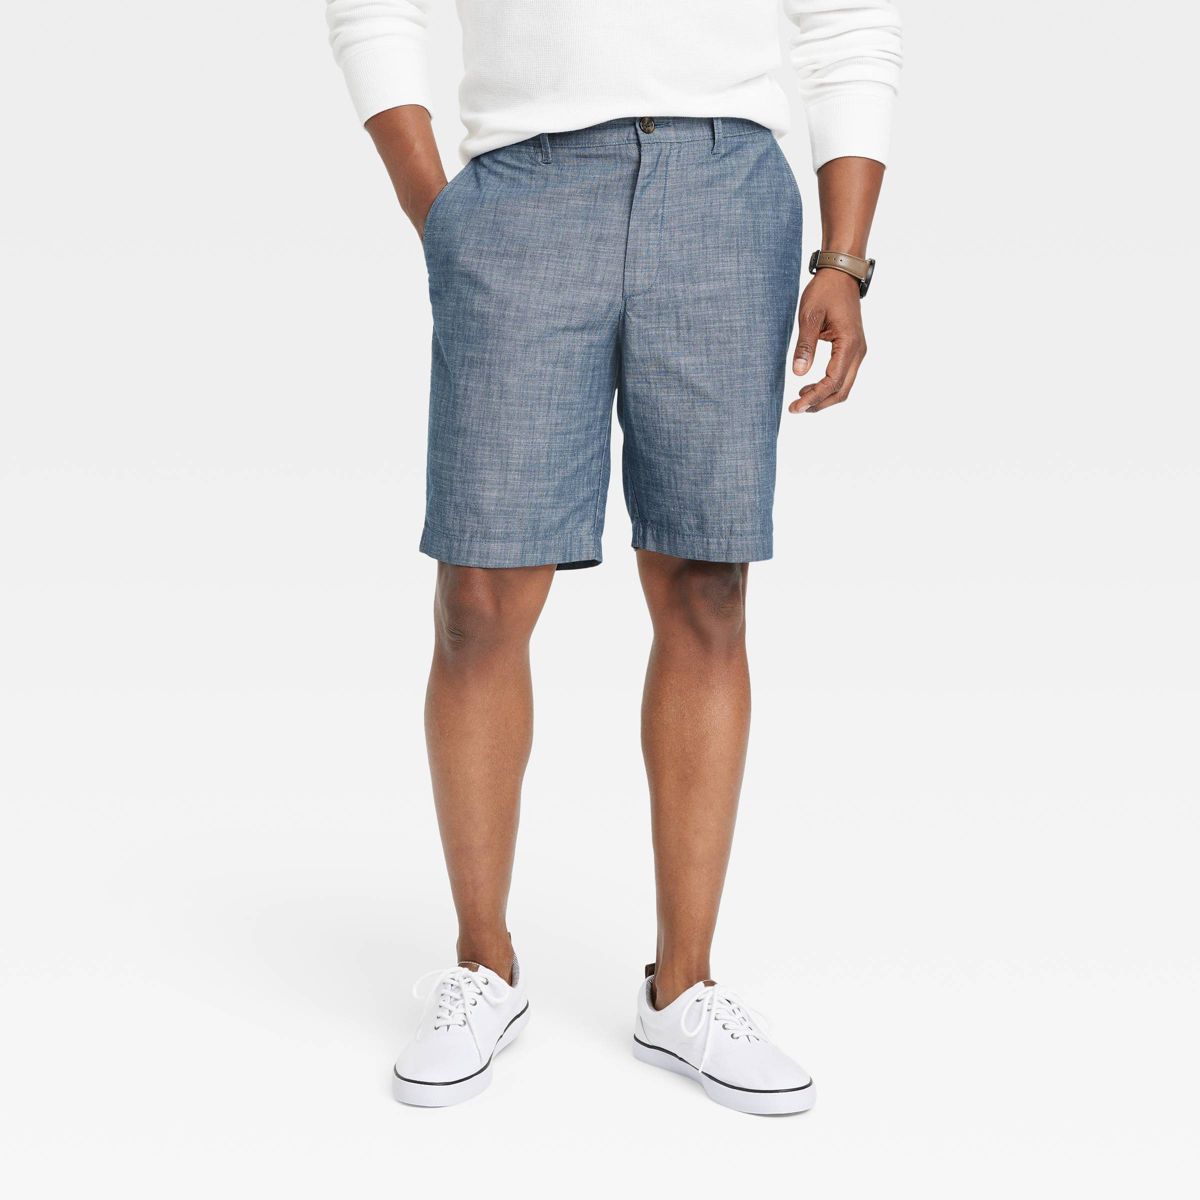 Men's Every Wear 9" Slim Fit Flat Front Chino Shorts - Goodfellow & Co™ | Target